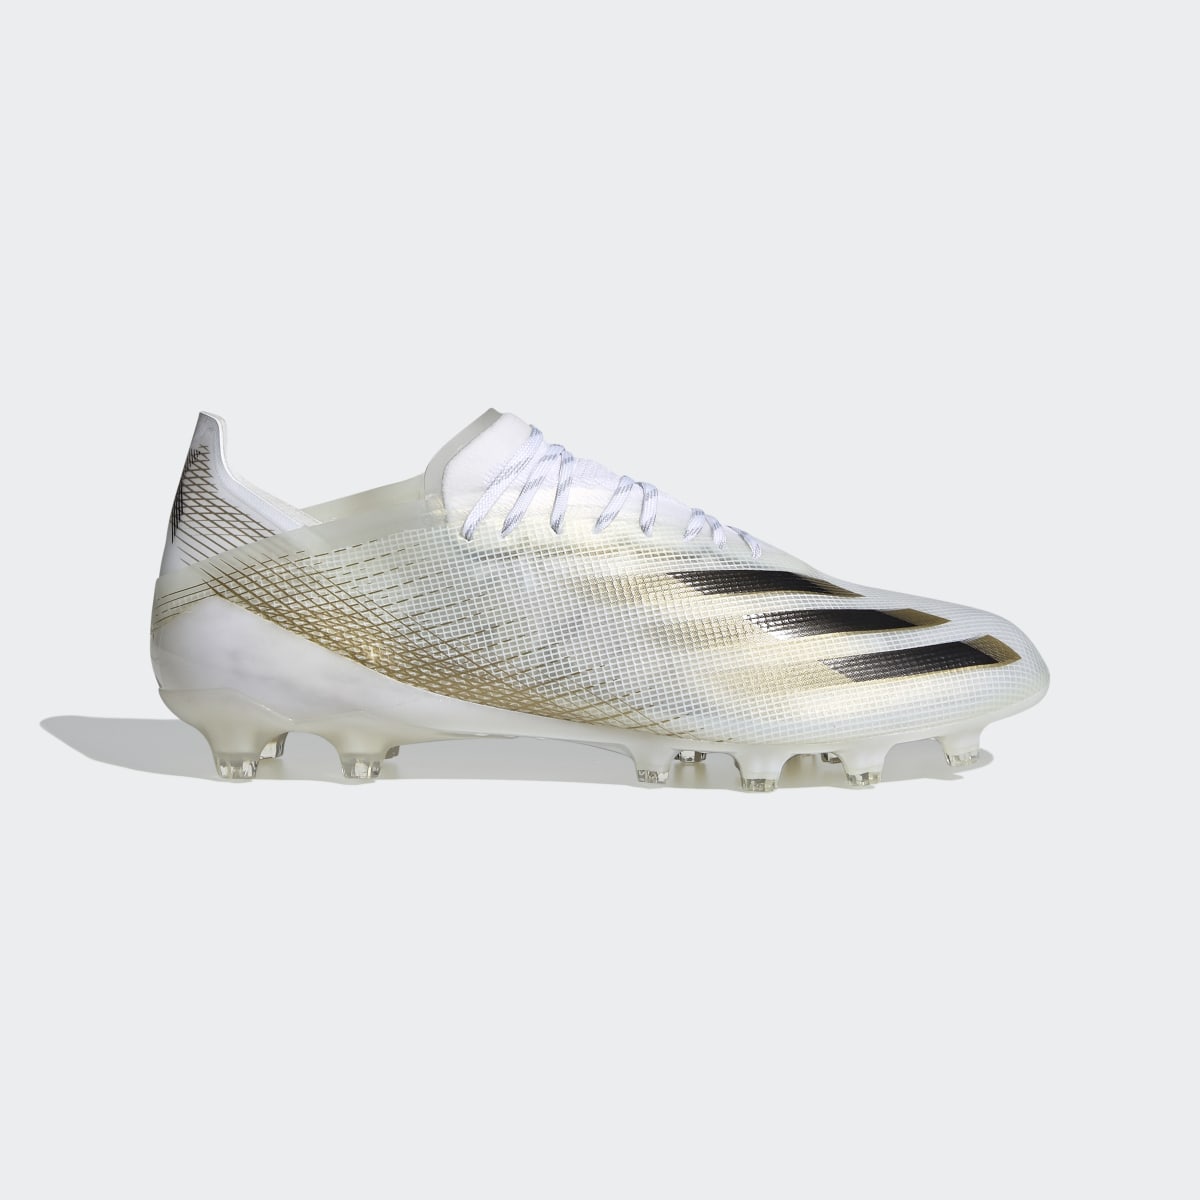 cleats for astroturf